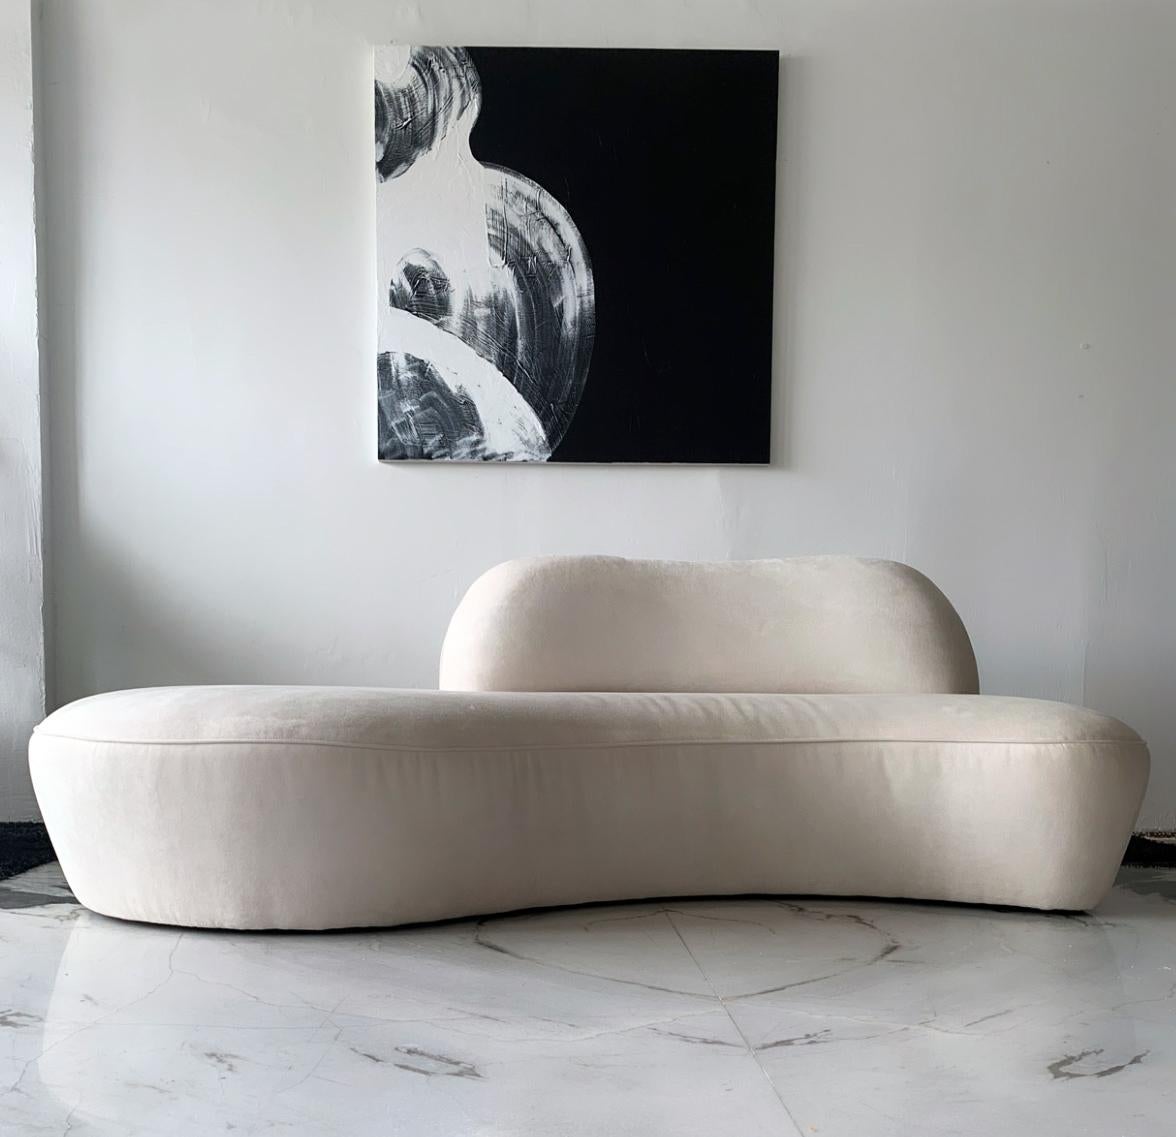 This sofa by Vladimir Kagan for American Leather has all the great staples of a Kagan design, gorgeous free-form curves, modern design, and effortlessly chic. This Zoe sofa is very similar to Vladmir Kagan's serpentine sofa, although slightly